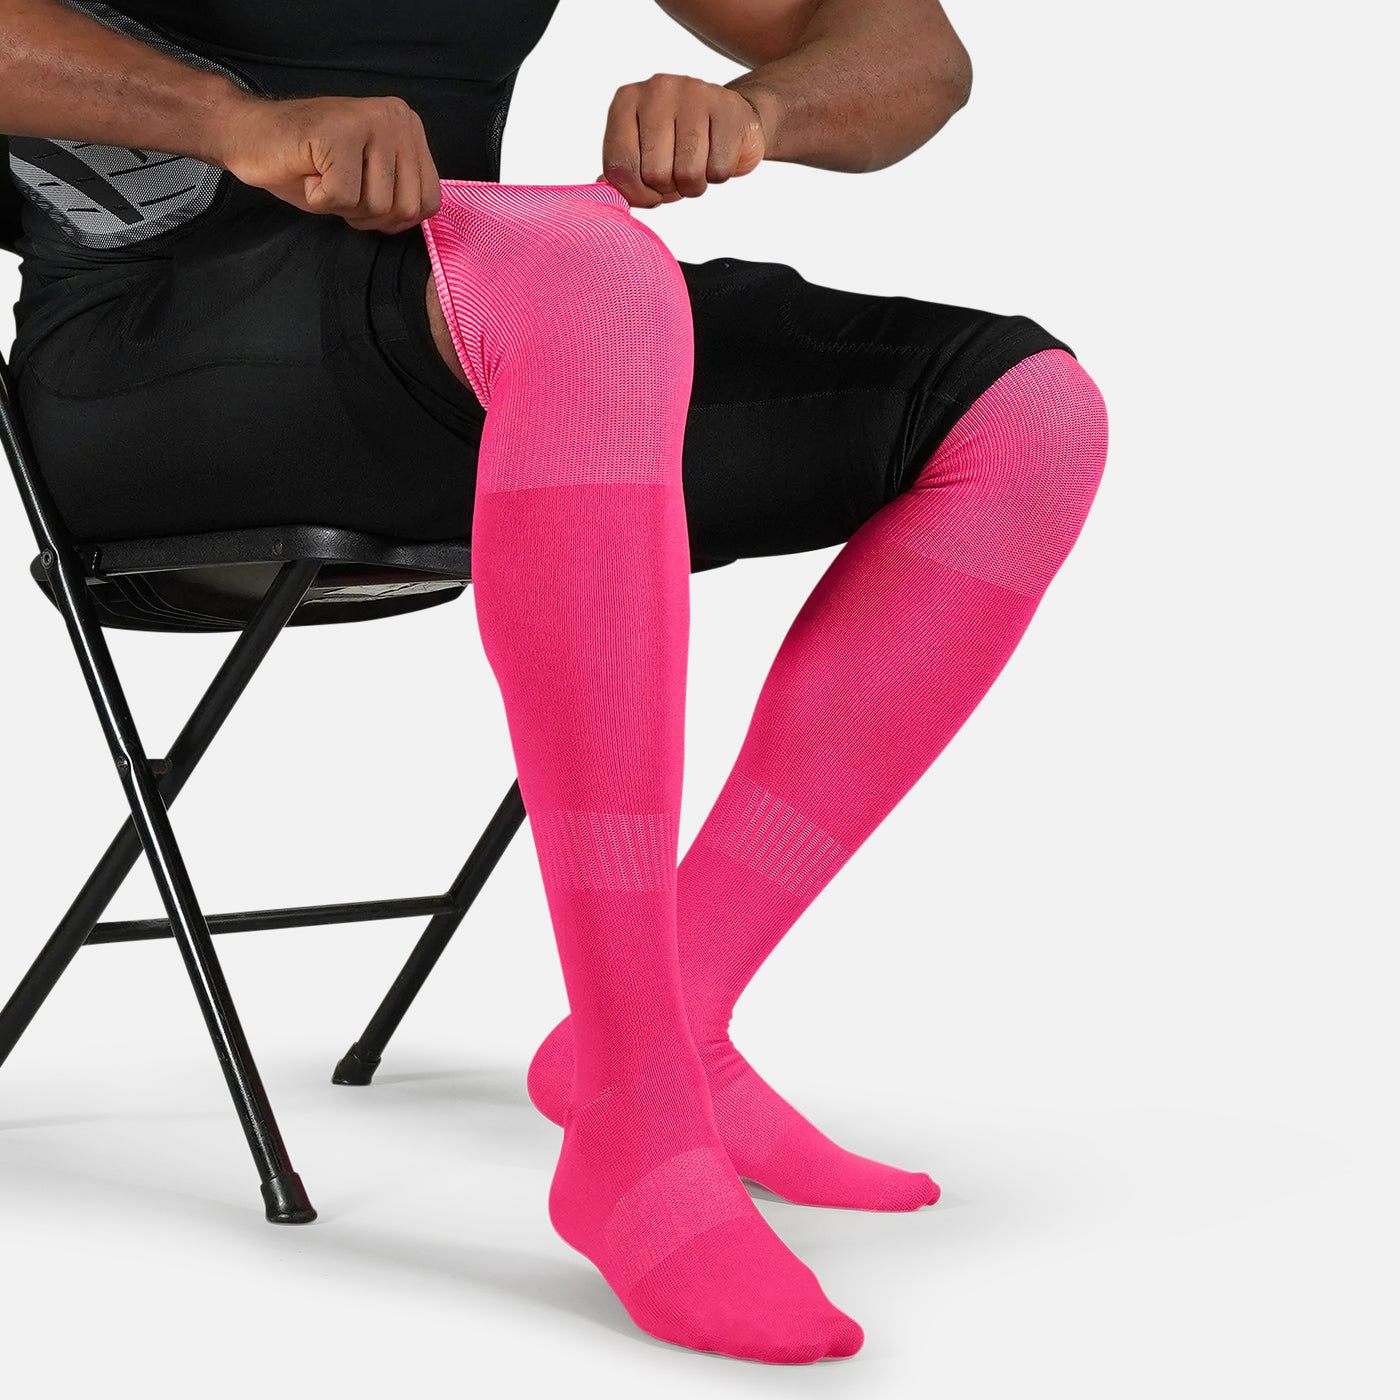 Striped Over the Knee Socks in Baby Pink and Hot Pink - The Sugarpuss  Collection